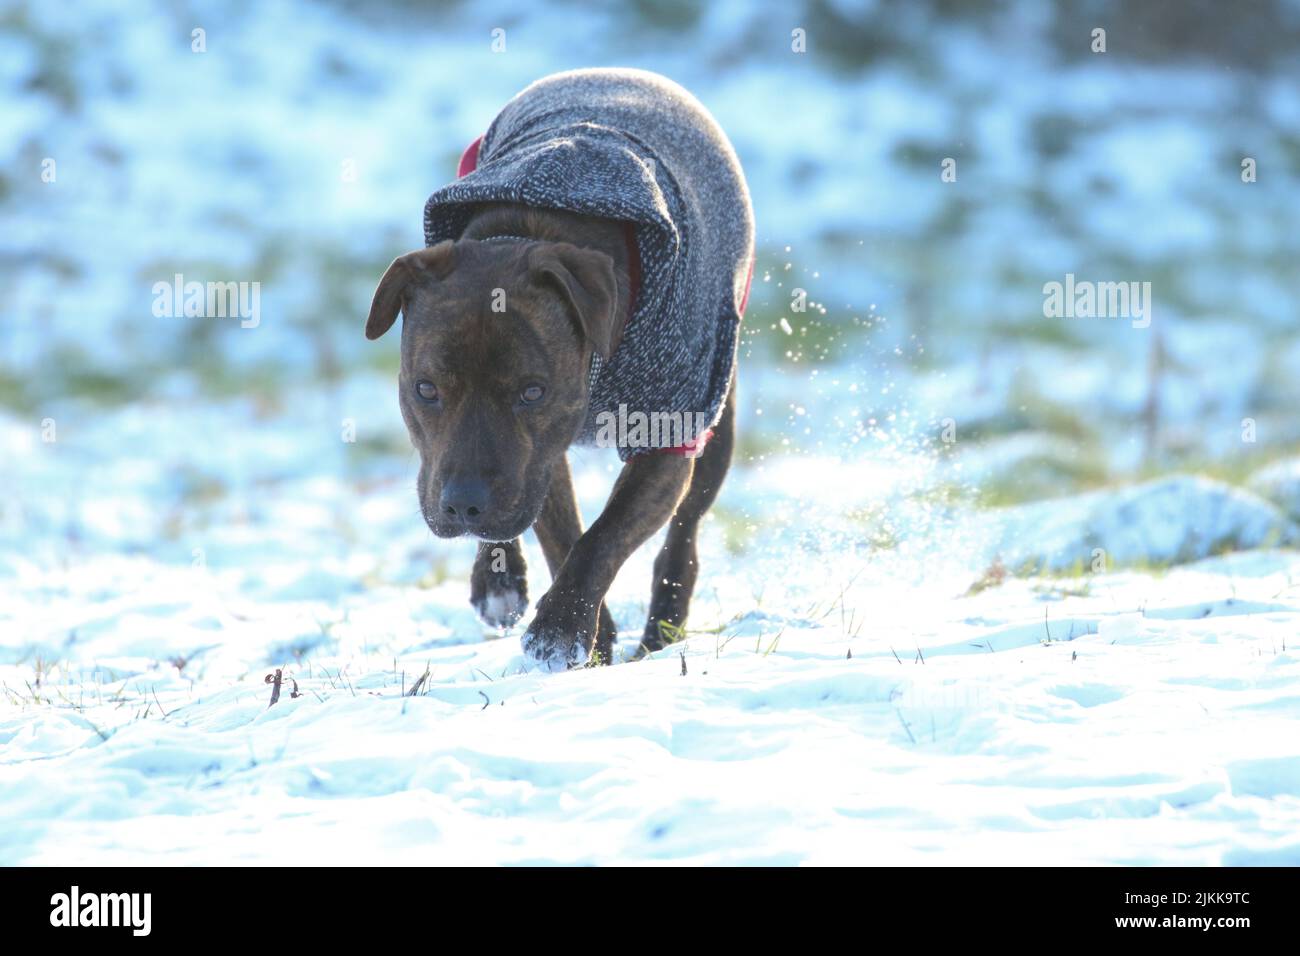 A shallow focus shot of a Staffordshire Bull Terrier dog wearing blue sweater walking on snow in bright sunlight with blurred background Stock Photo